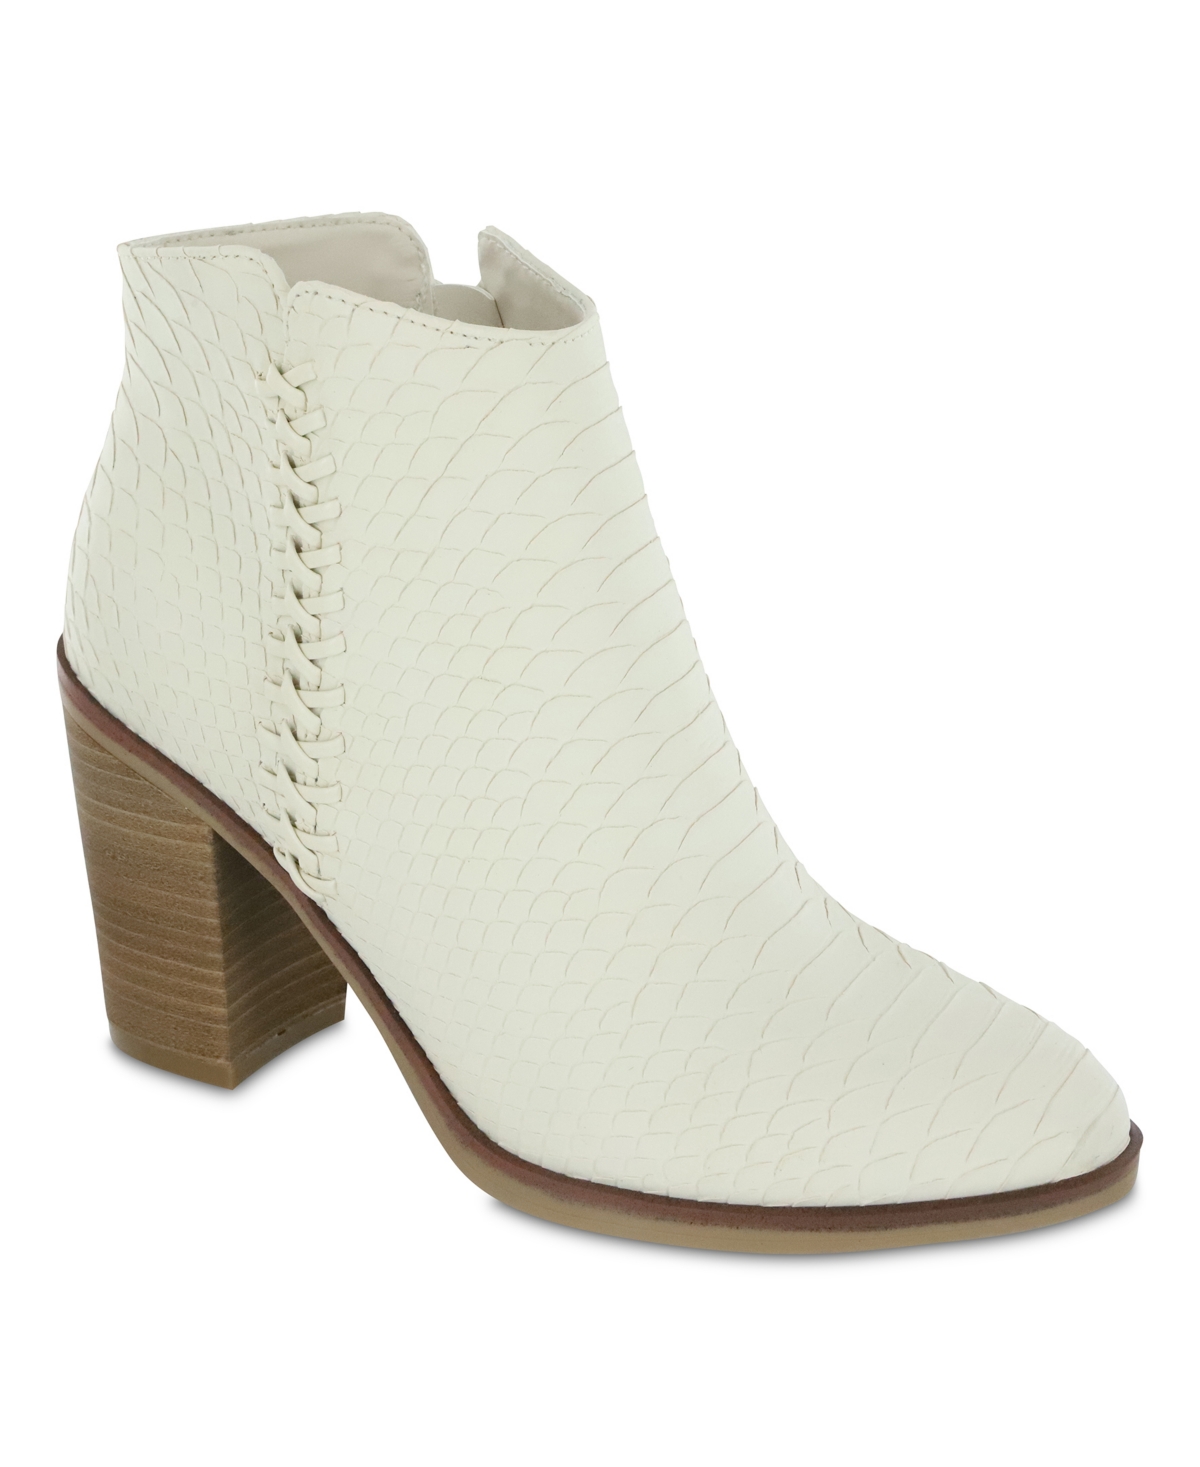 Women's Dusky Pointed Toe Booties - Ivory